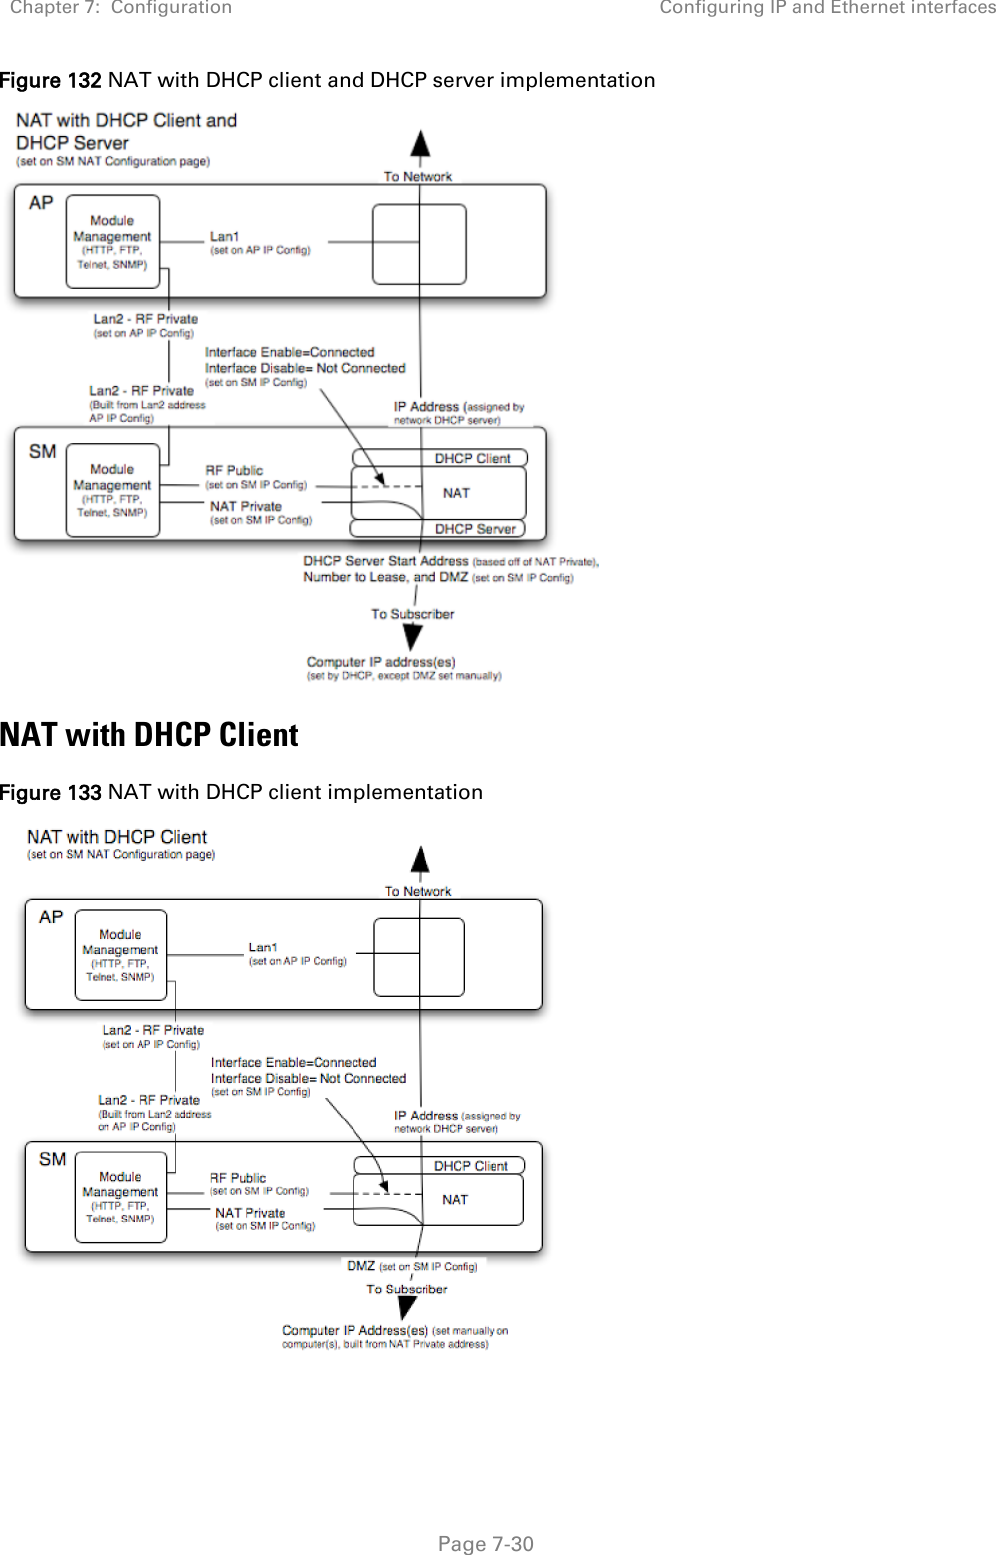 Chapter 7:  Configuration Configuring IP and Ethernet interfaces   Page 7-30 Figure 132 NAT with DHCP client and DHCP server implementation  NAT with DHCP Client Figure 133 NAT with DHCP client implementation  